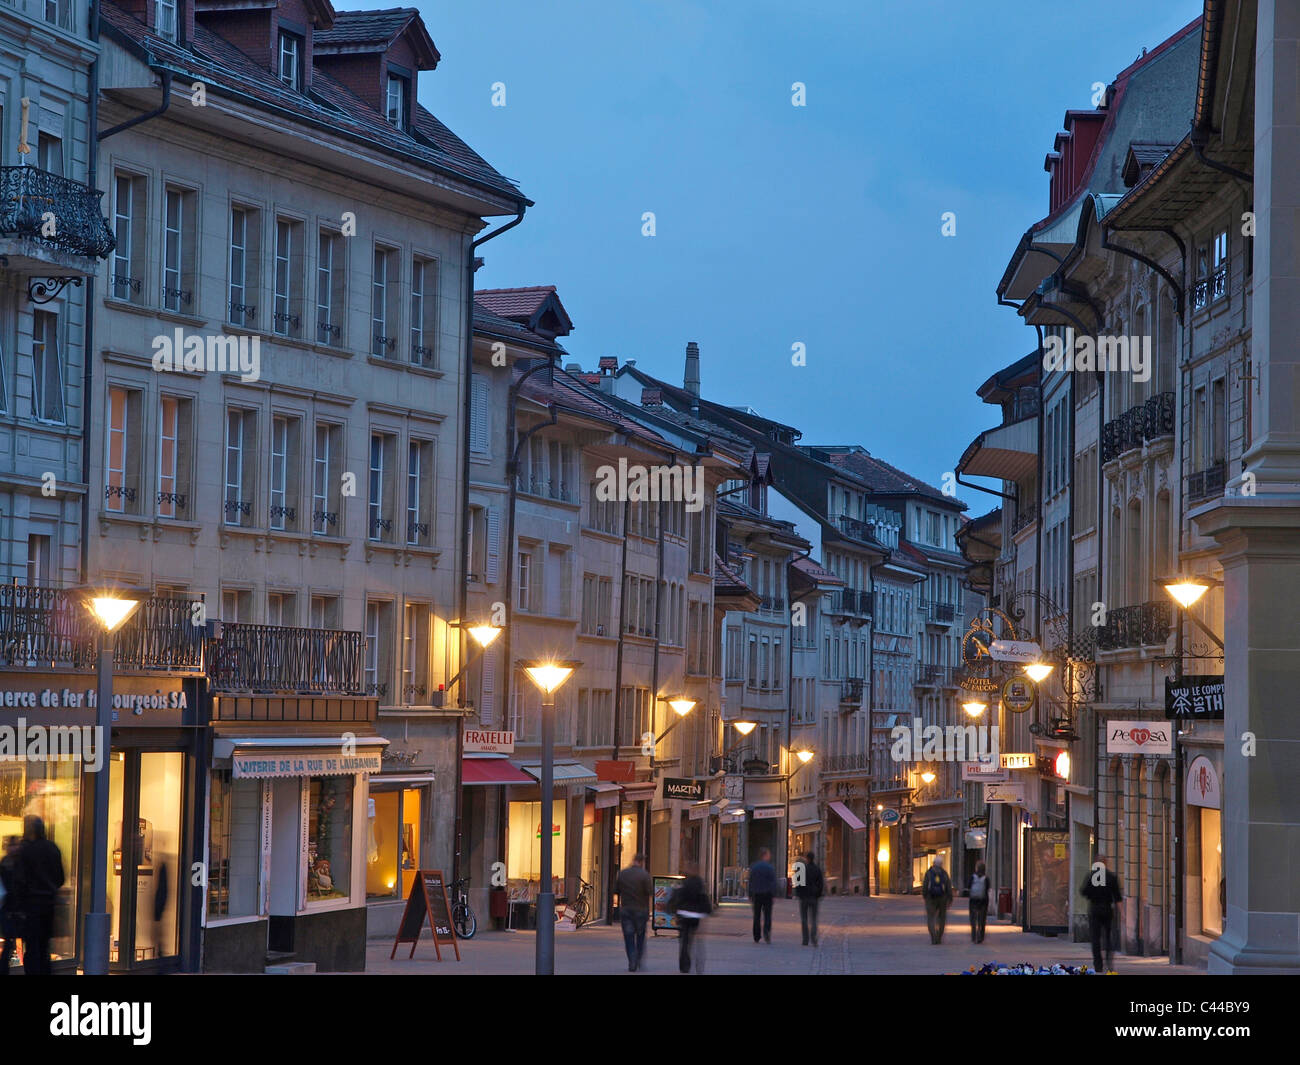 Evening, Old Town, Fribourg, people, street, lights, town, city, canton Freiburg, Switzerland, Stock Photo